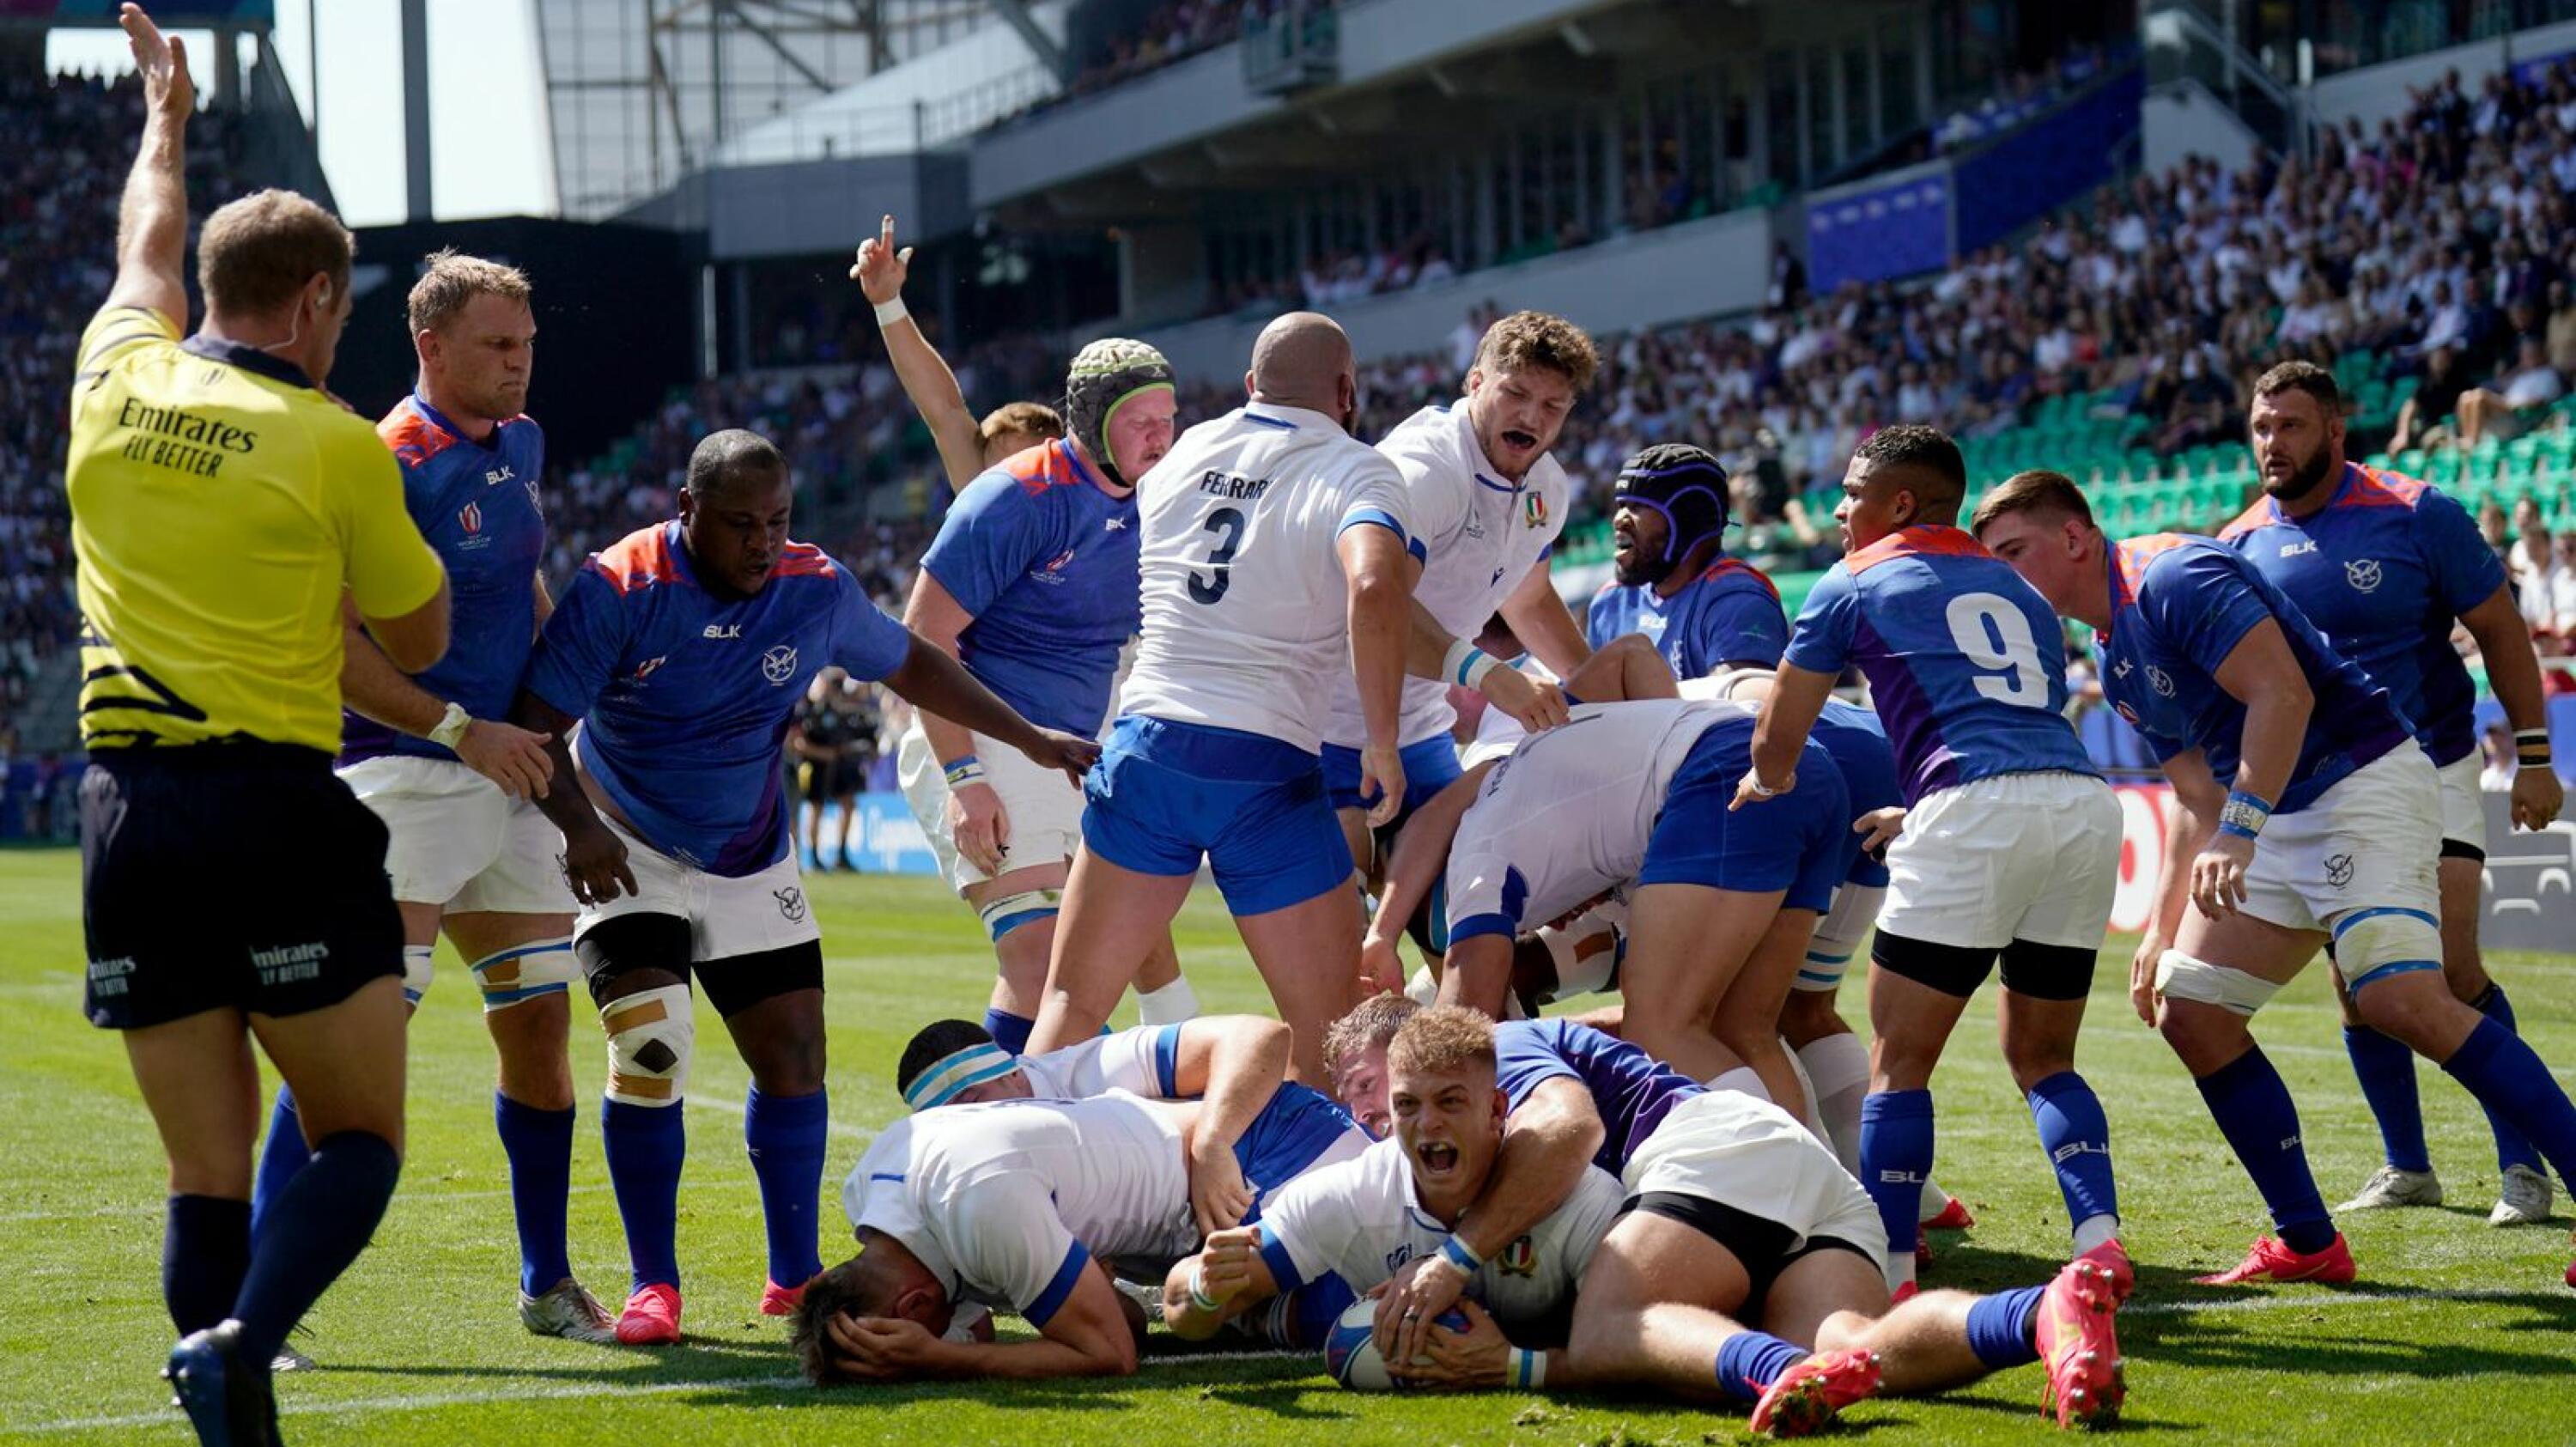 Italy's number eight Lorenzo Cannone crosses the line to score Italy's first try during their Rugby World Cup Pool A match against Namibia at Stade Geoffroy-Guichard in Saint-Etienne on Saturday